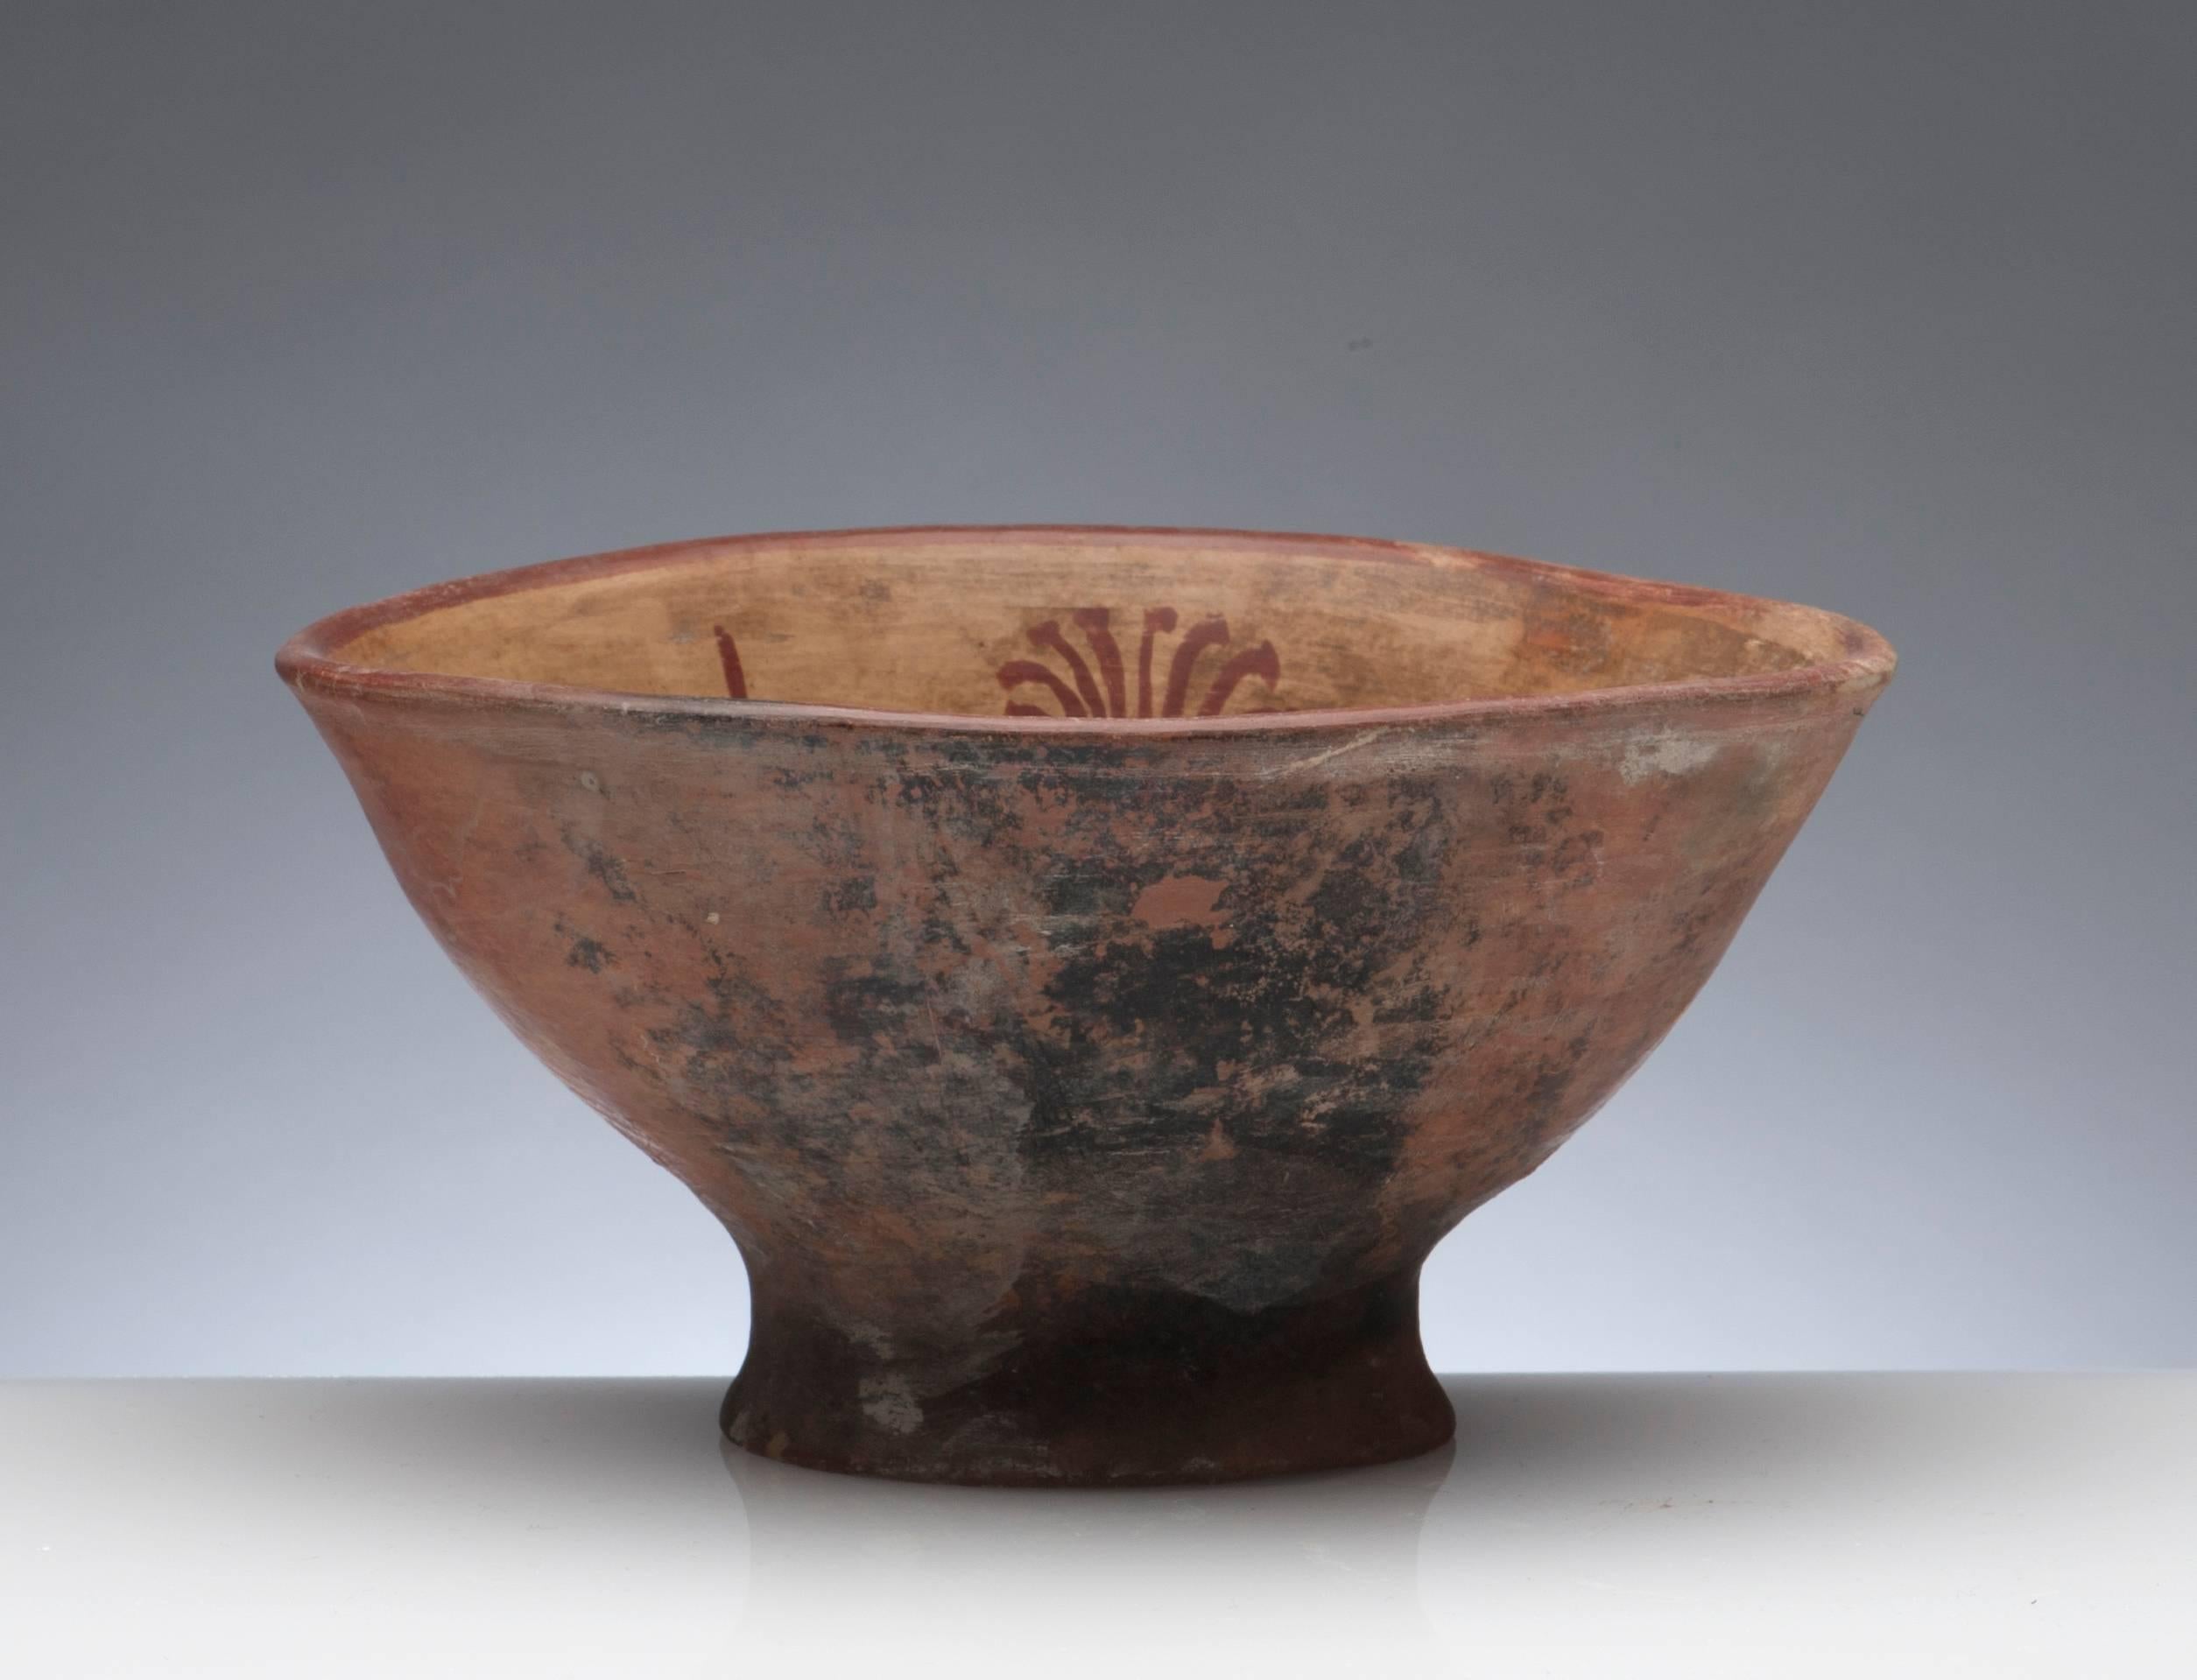 Fine Pre-Columbian Narino footed bowl from Columbia,  circa 850 to 1500.  Bowl depicts the rare warrior image with alternating eight pointed star symbol, most likely Venus.